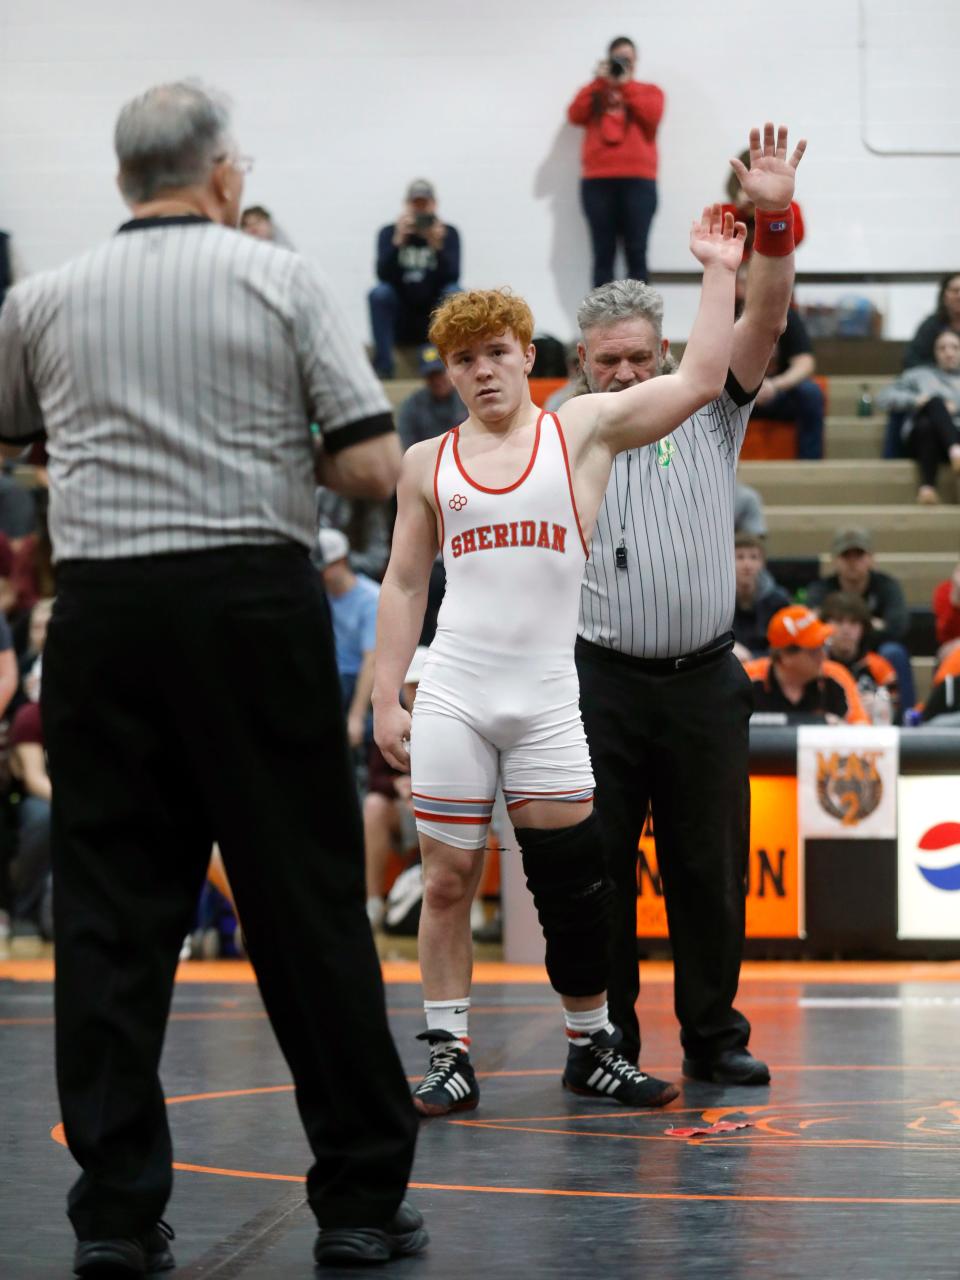 Sheridan's Coltyn Reedy earned his third Muskungum Valley League title on Saturday at New Lexington High School. Reedy, ranked third in Division II, missed five weeks with a knee injury before returning for the league tournament.